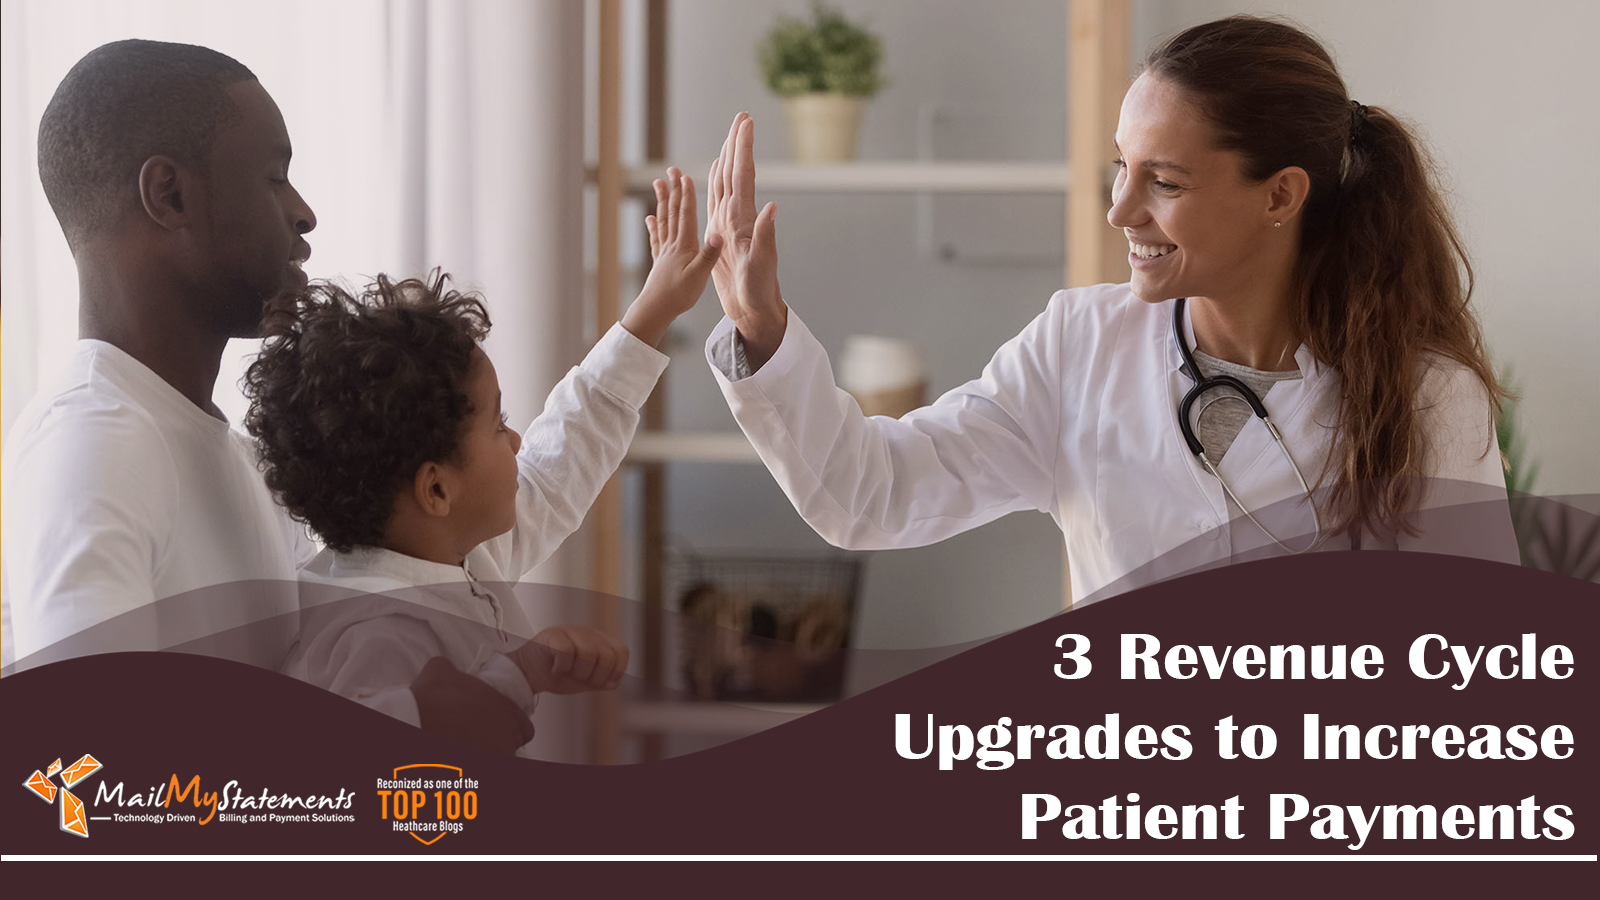 3 Revenue Cycle Upgrades to Increase Patient Payments2